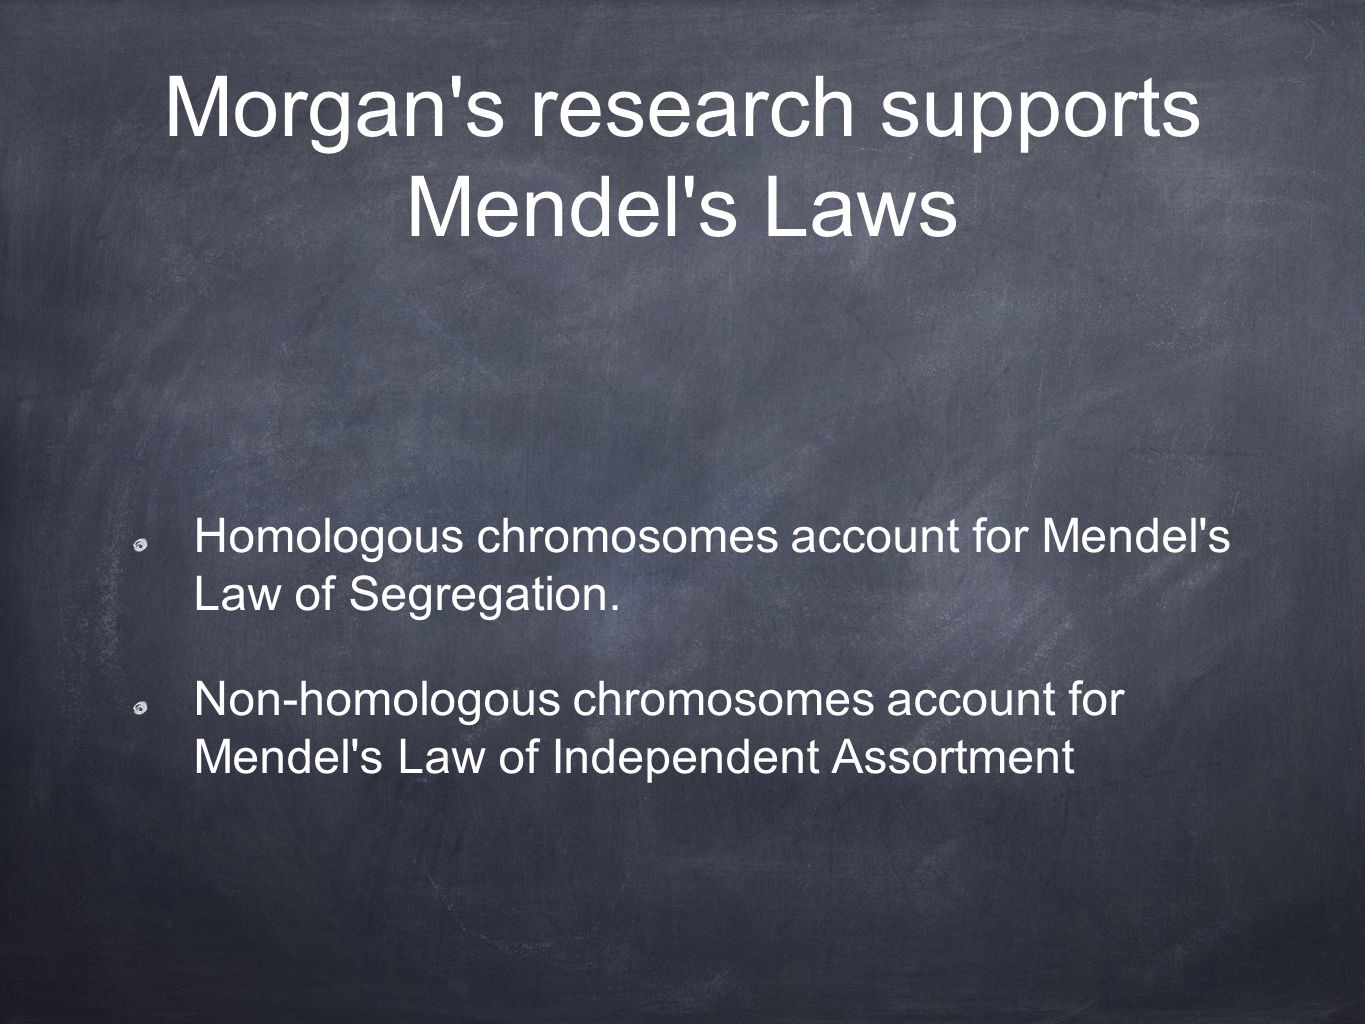 Morgan s research supports Mendel s Laws Homologous chromosomes account for Mendel s Law of Segregation.